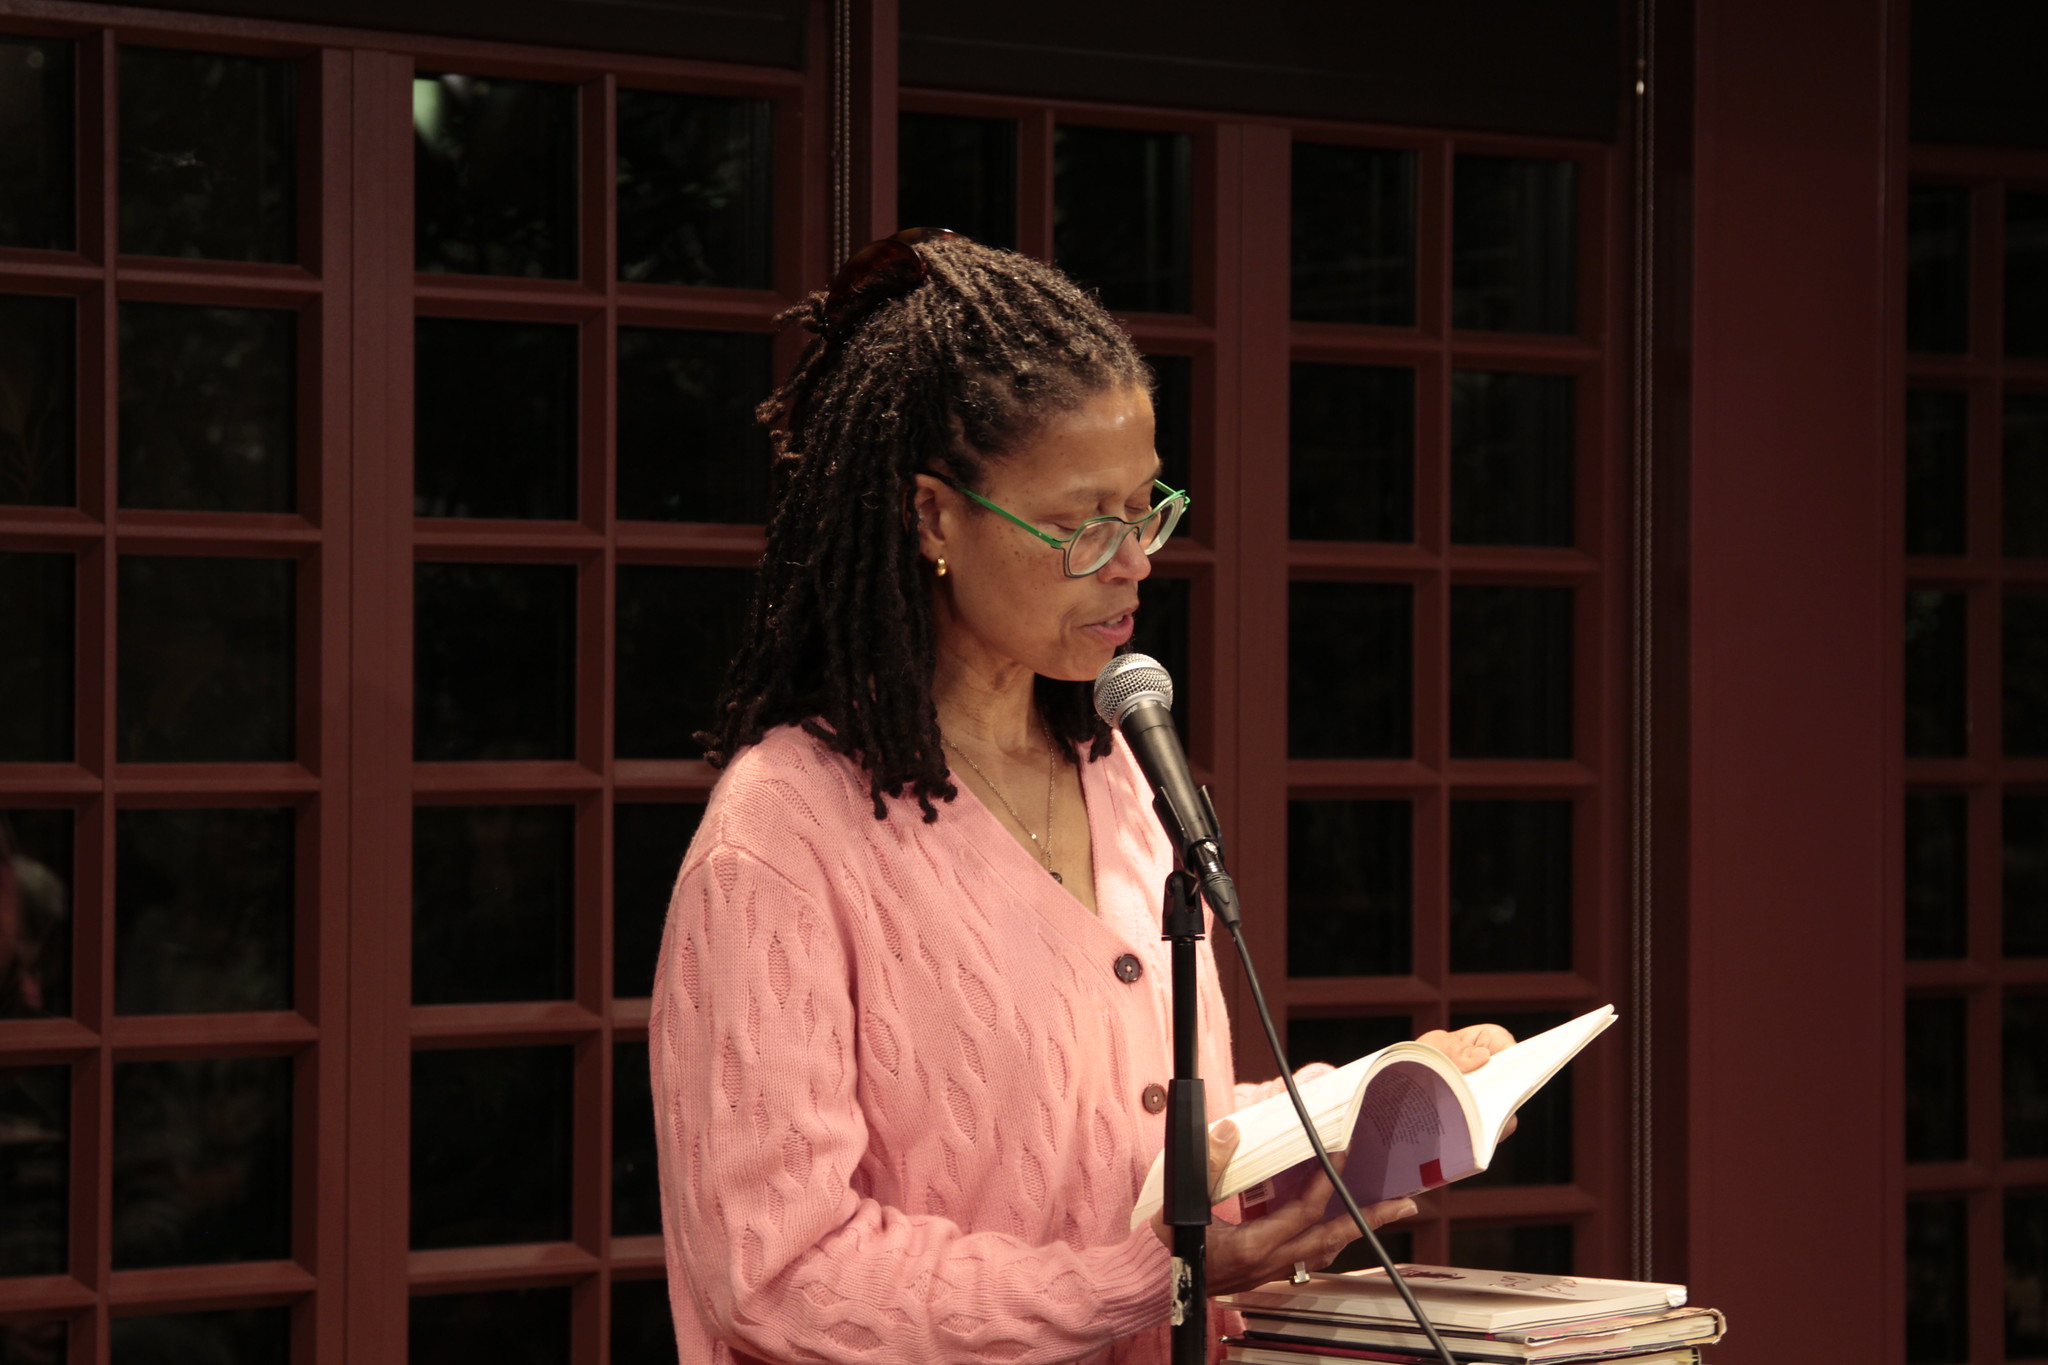 Evie Shockley reading a book at a microphone standing at a podium